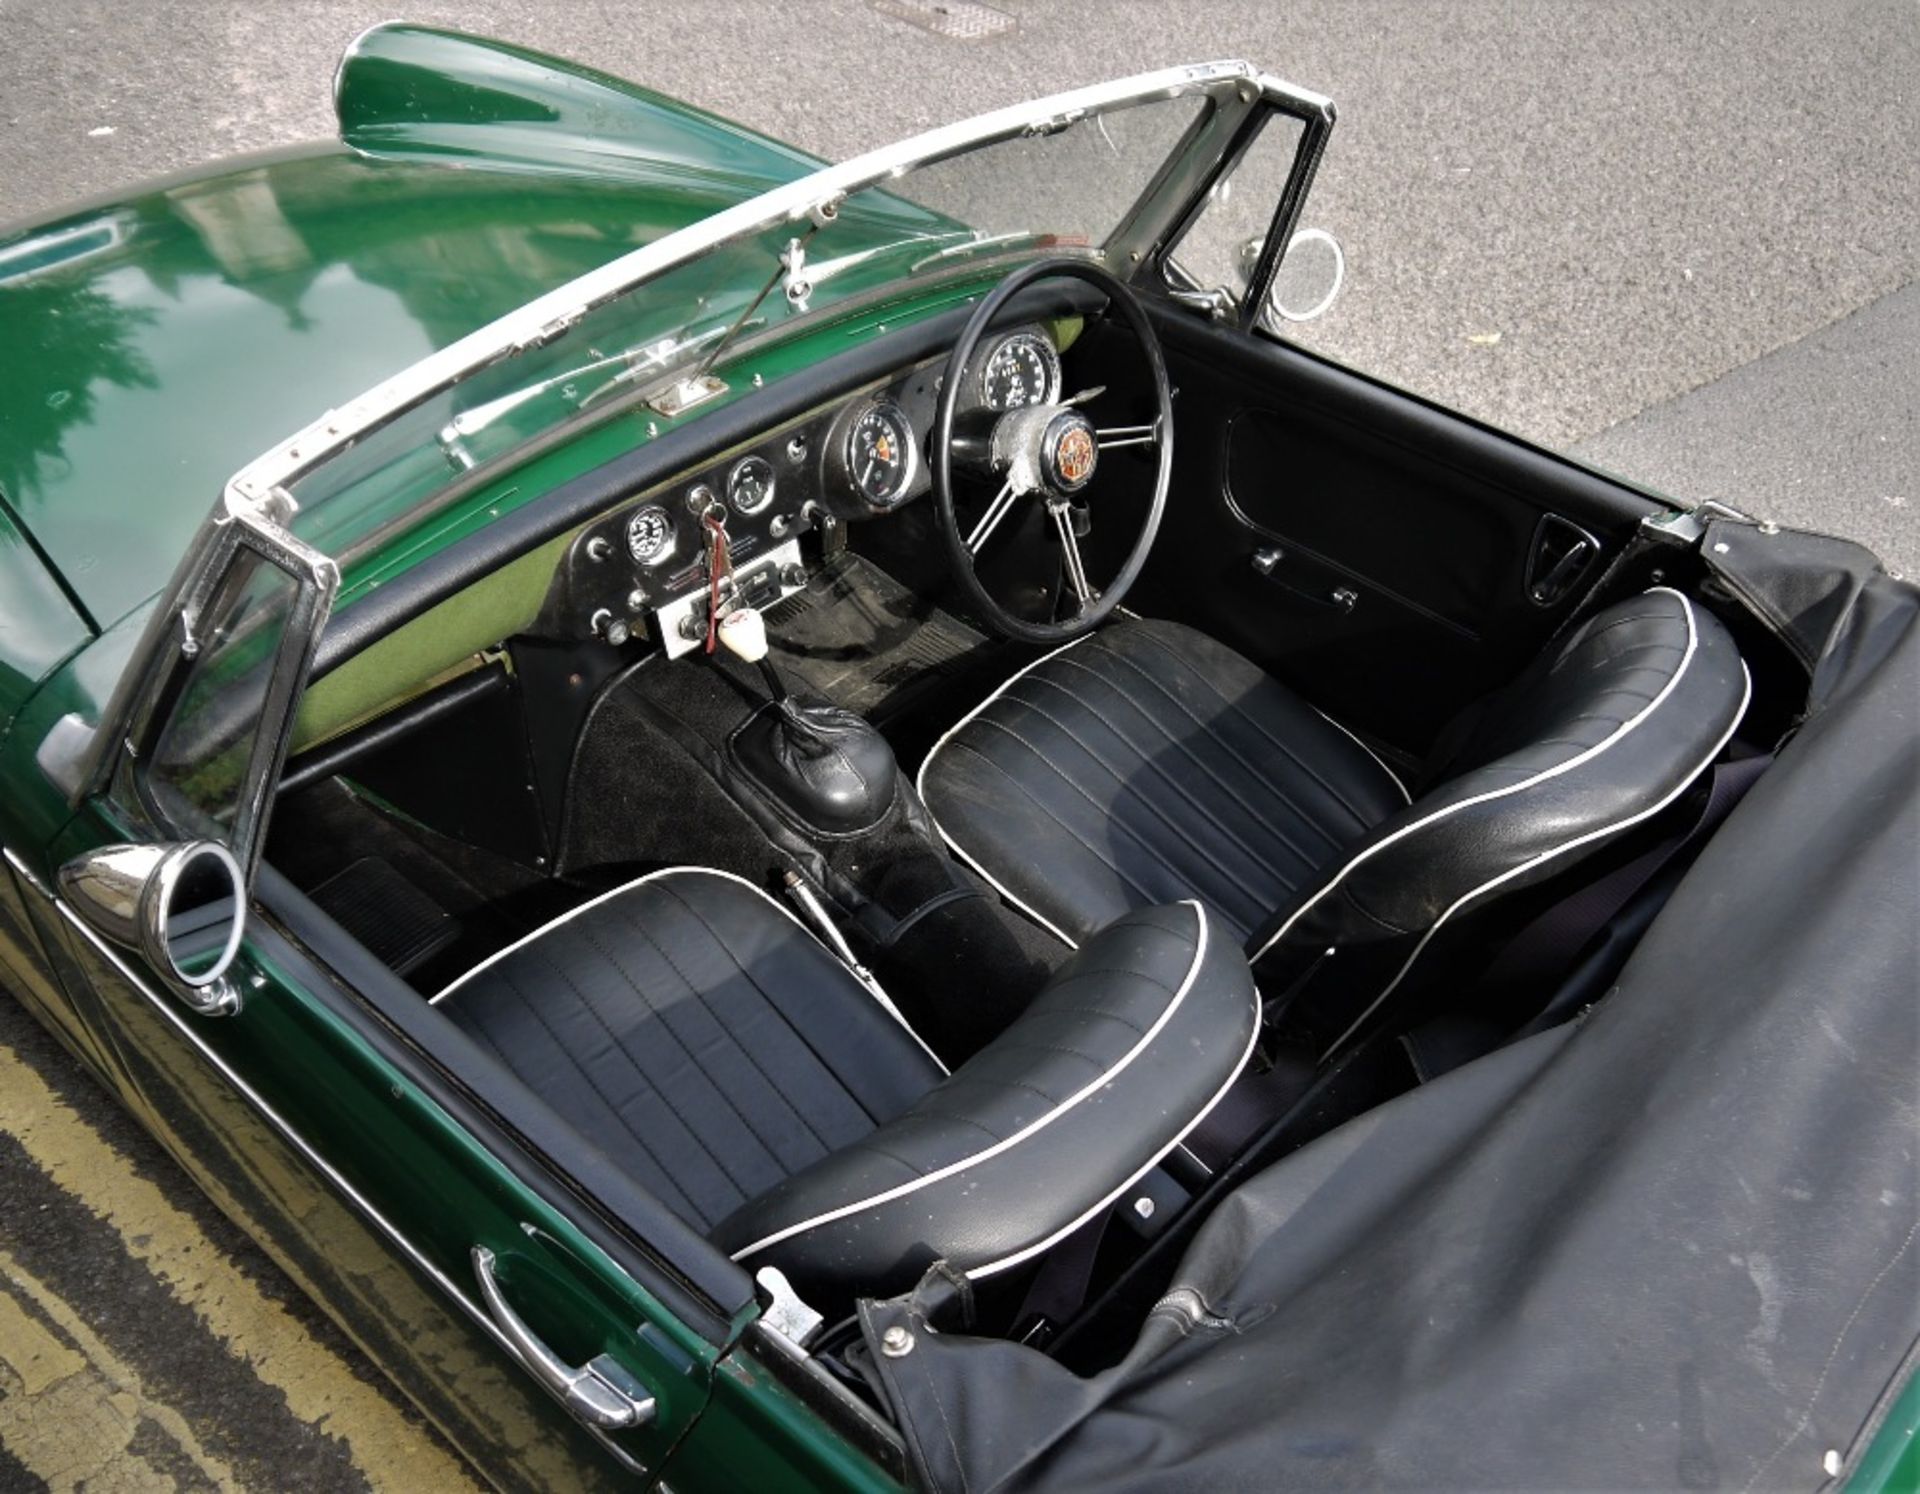 1968 MG MIDGET MARK III Registration Number: VHV 707G Chassis Number: G-AN4/67396-G Recorded - Image 19 of 21